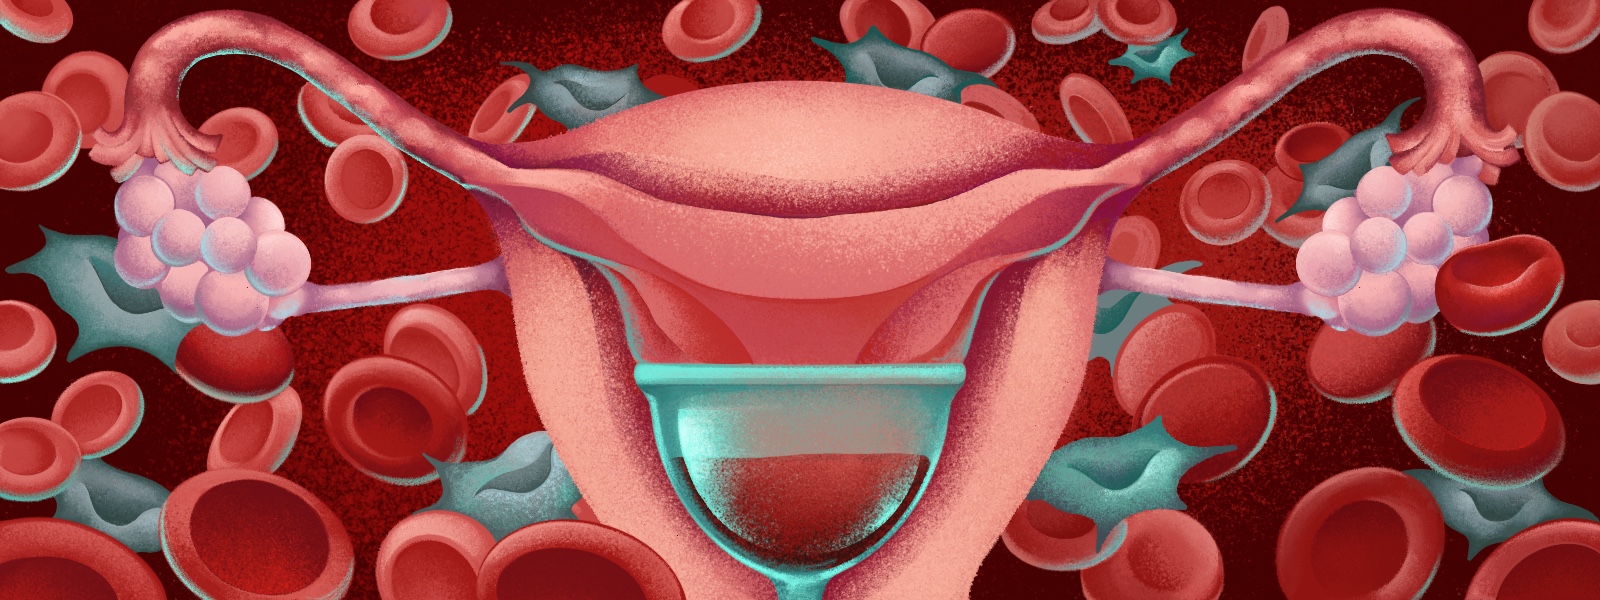 FertilityEd - During menstruation, the body sheds tissue and blood